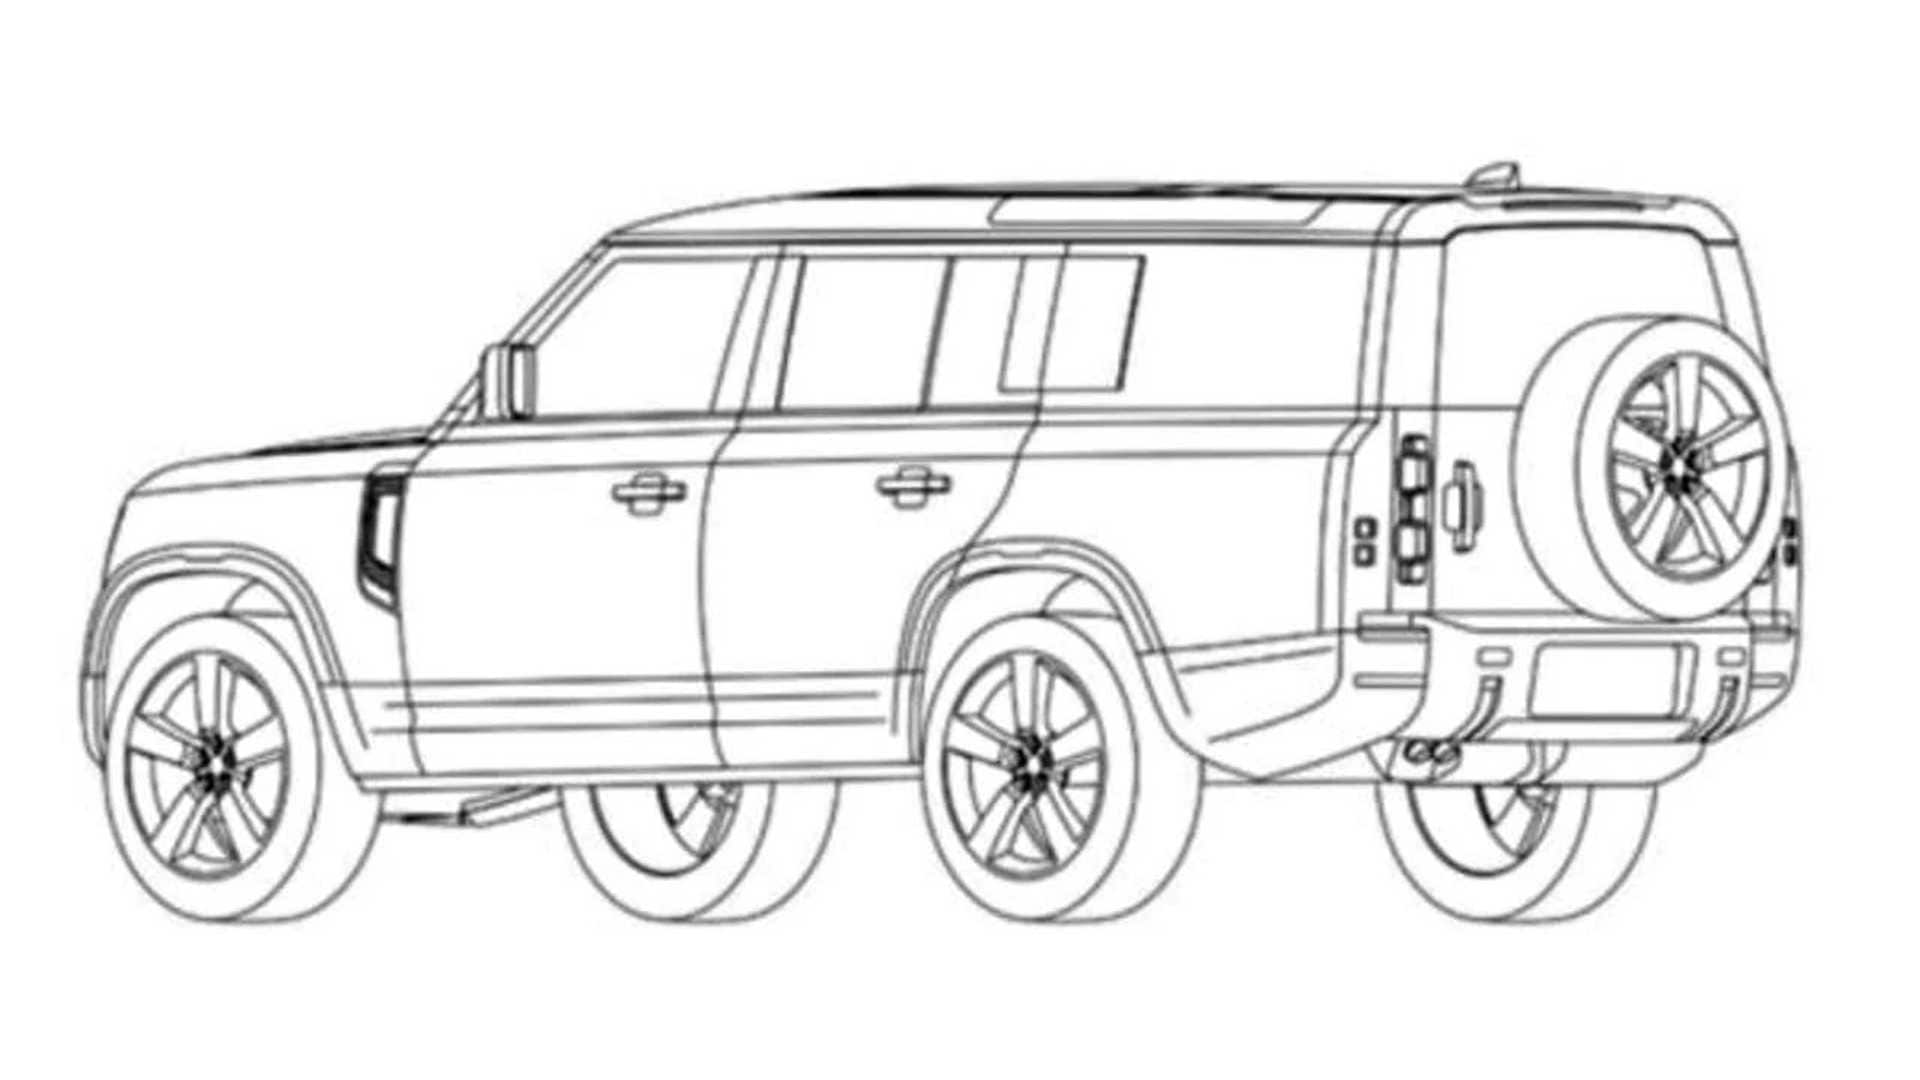 The Land Rover Defender 130 would come as a premium explorer with a seating capacity for eight people. (Image: Motor.es)